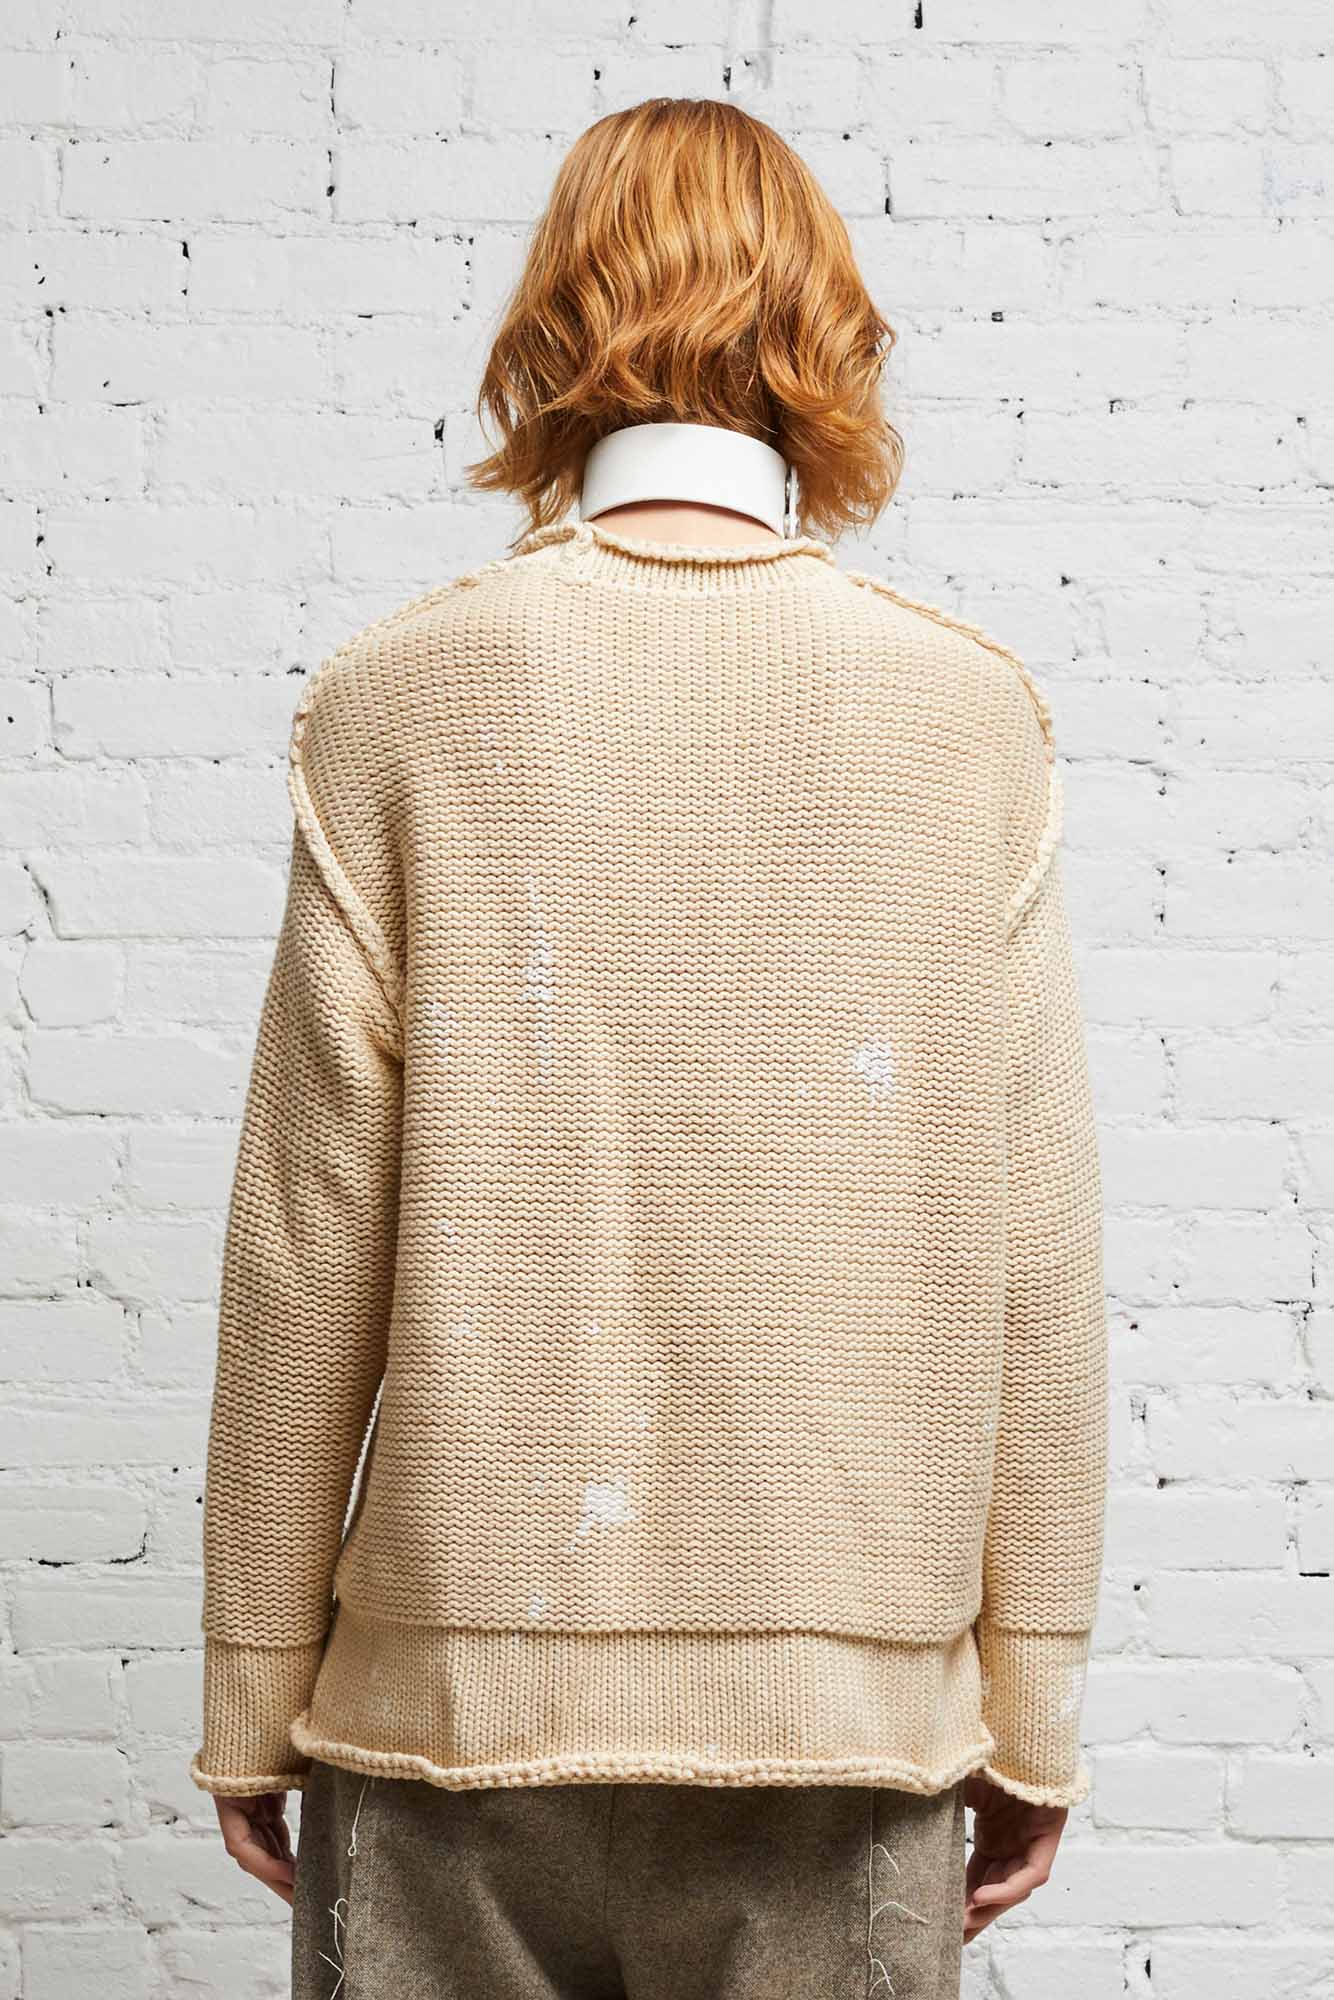 ROLLED EDGE BOXY SWEATER - NATURAL